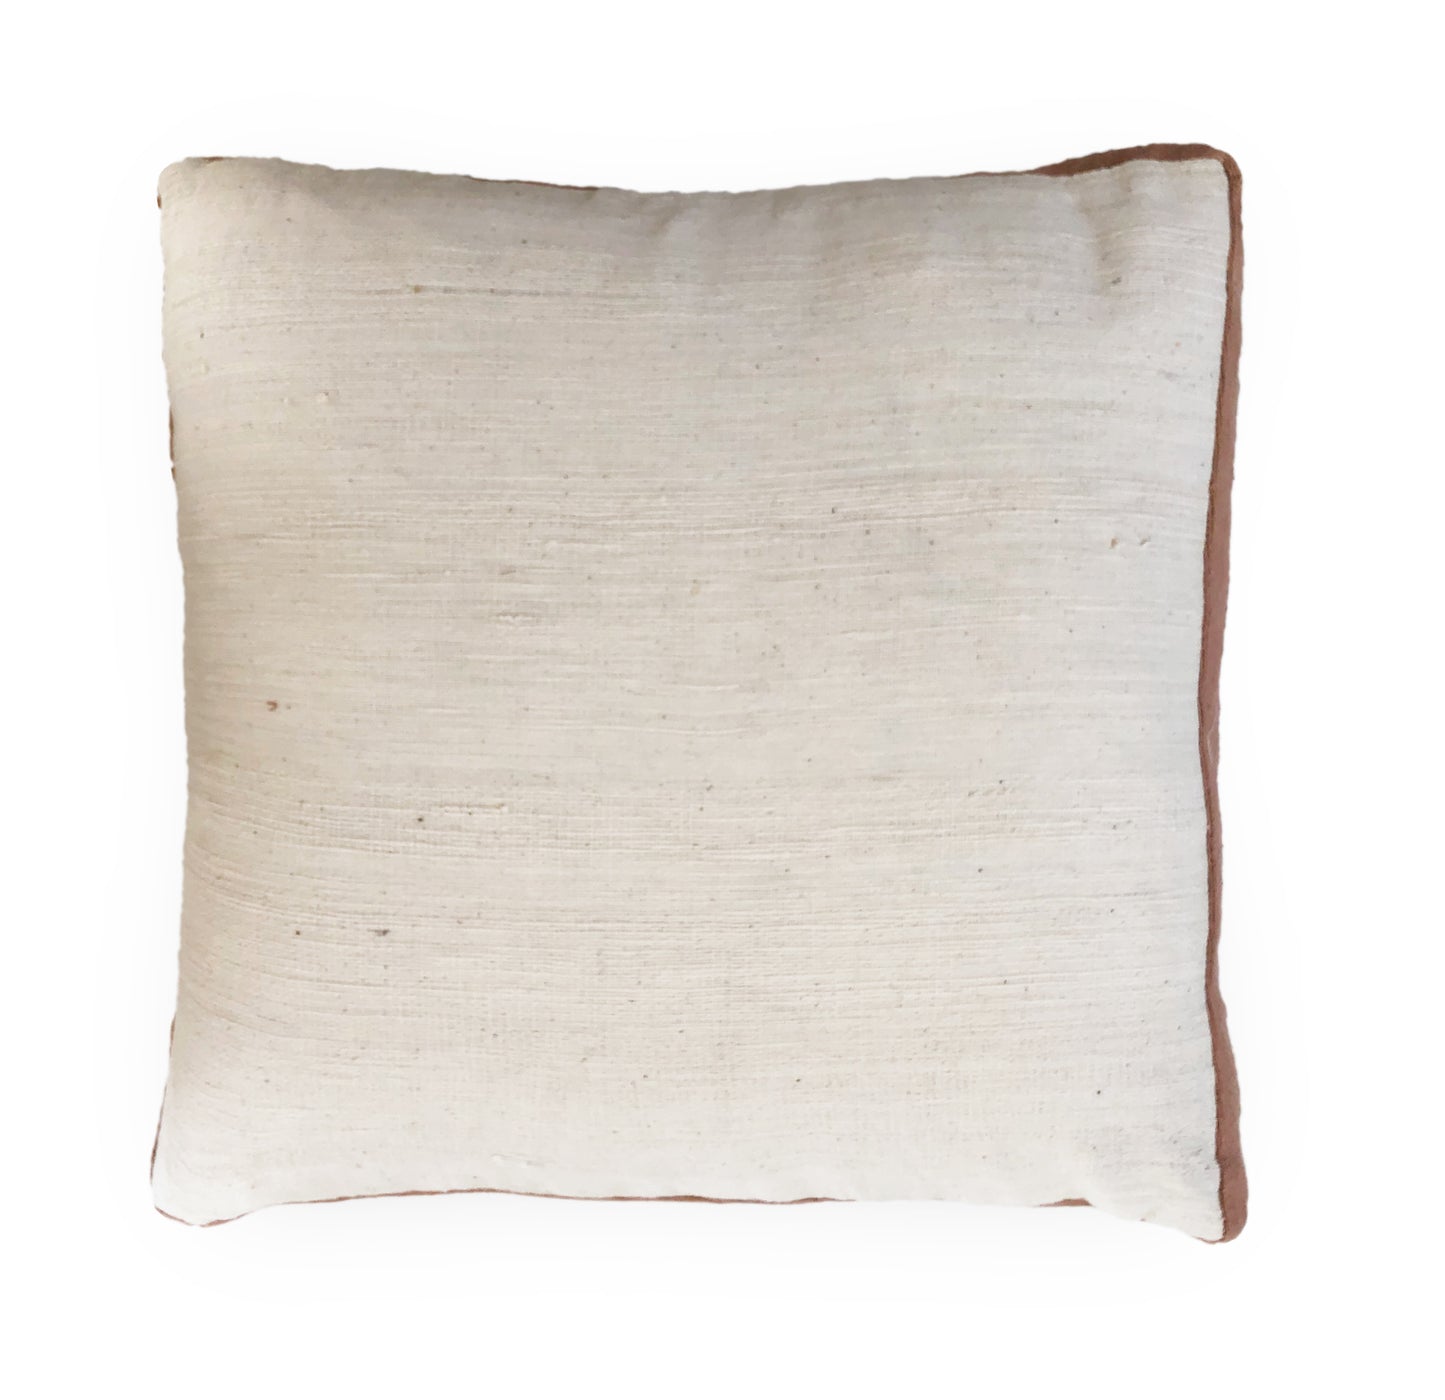 White & Himalayan Contour Line Pillow Cover 18x18in